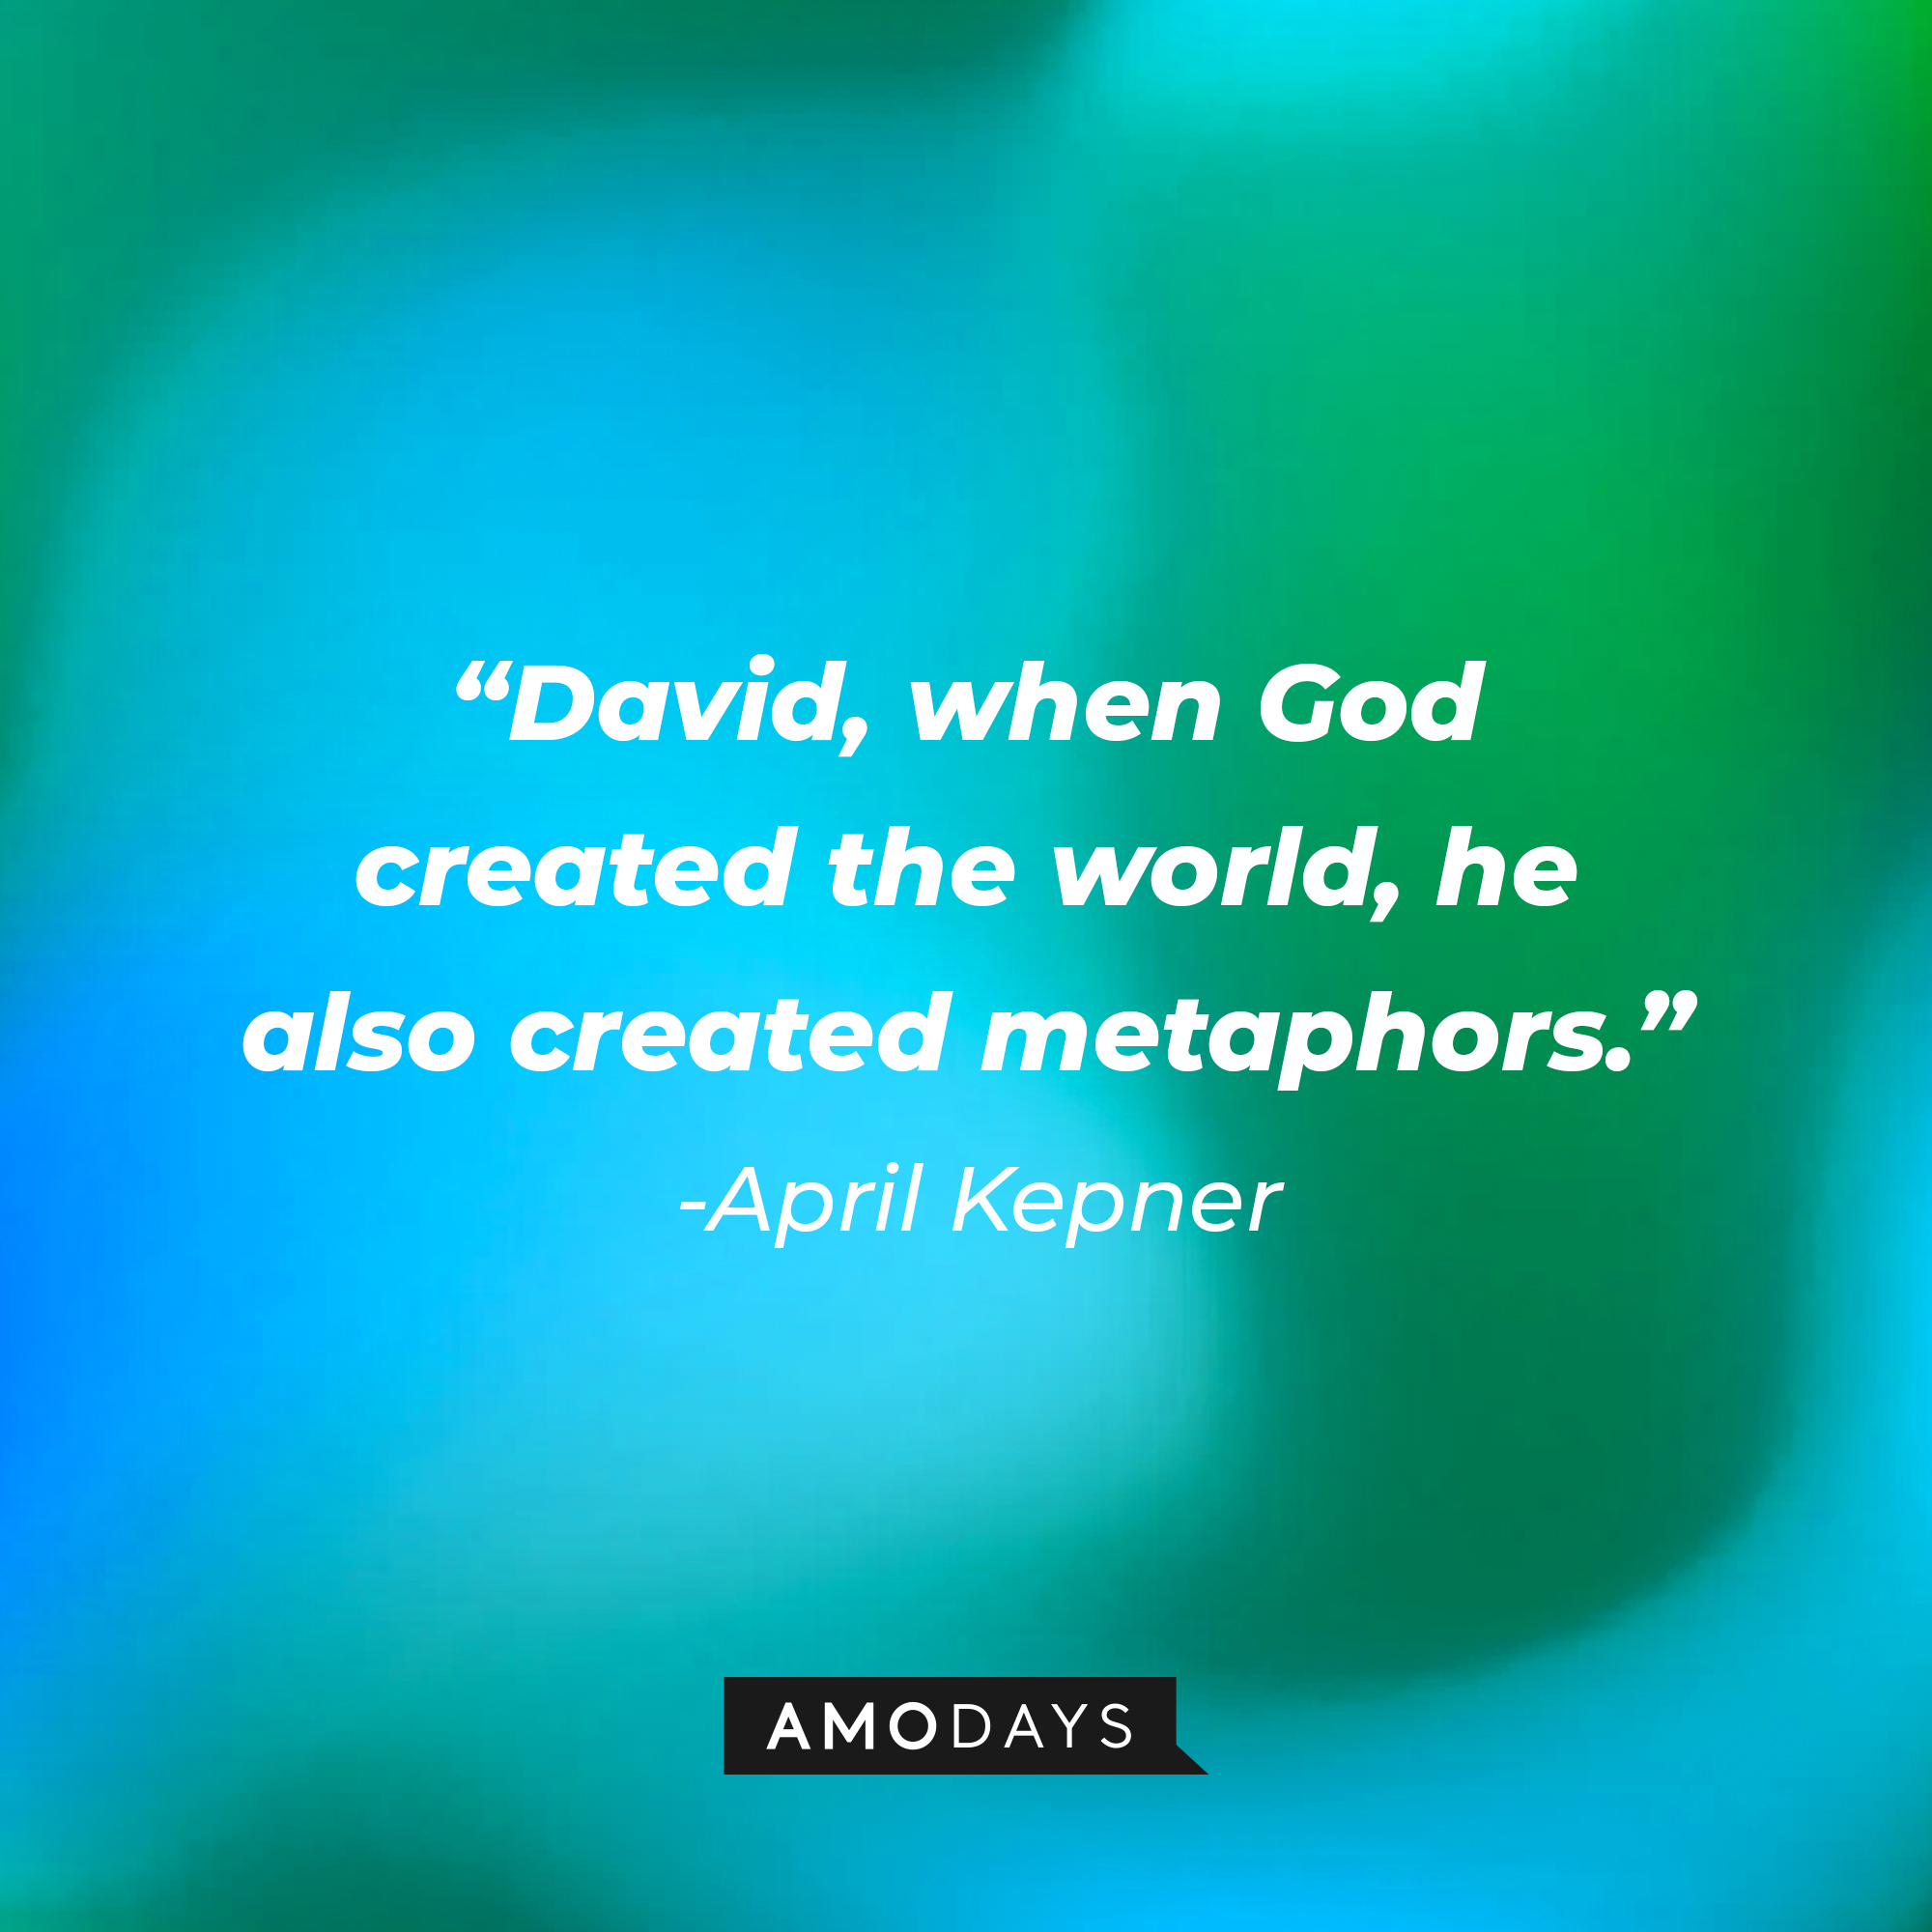 April Kepner's quote: "David, when God created the world, he also created metaphors." | Source: AmoDays